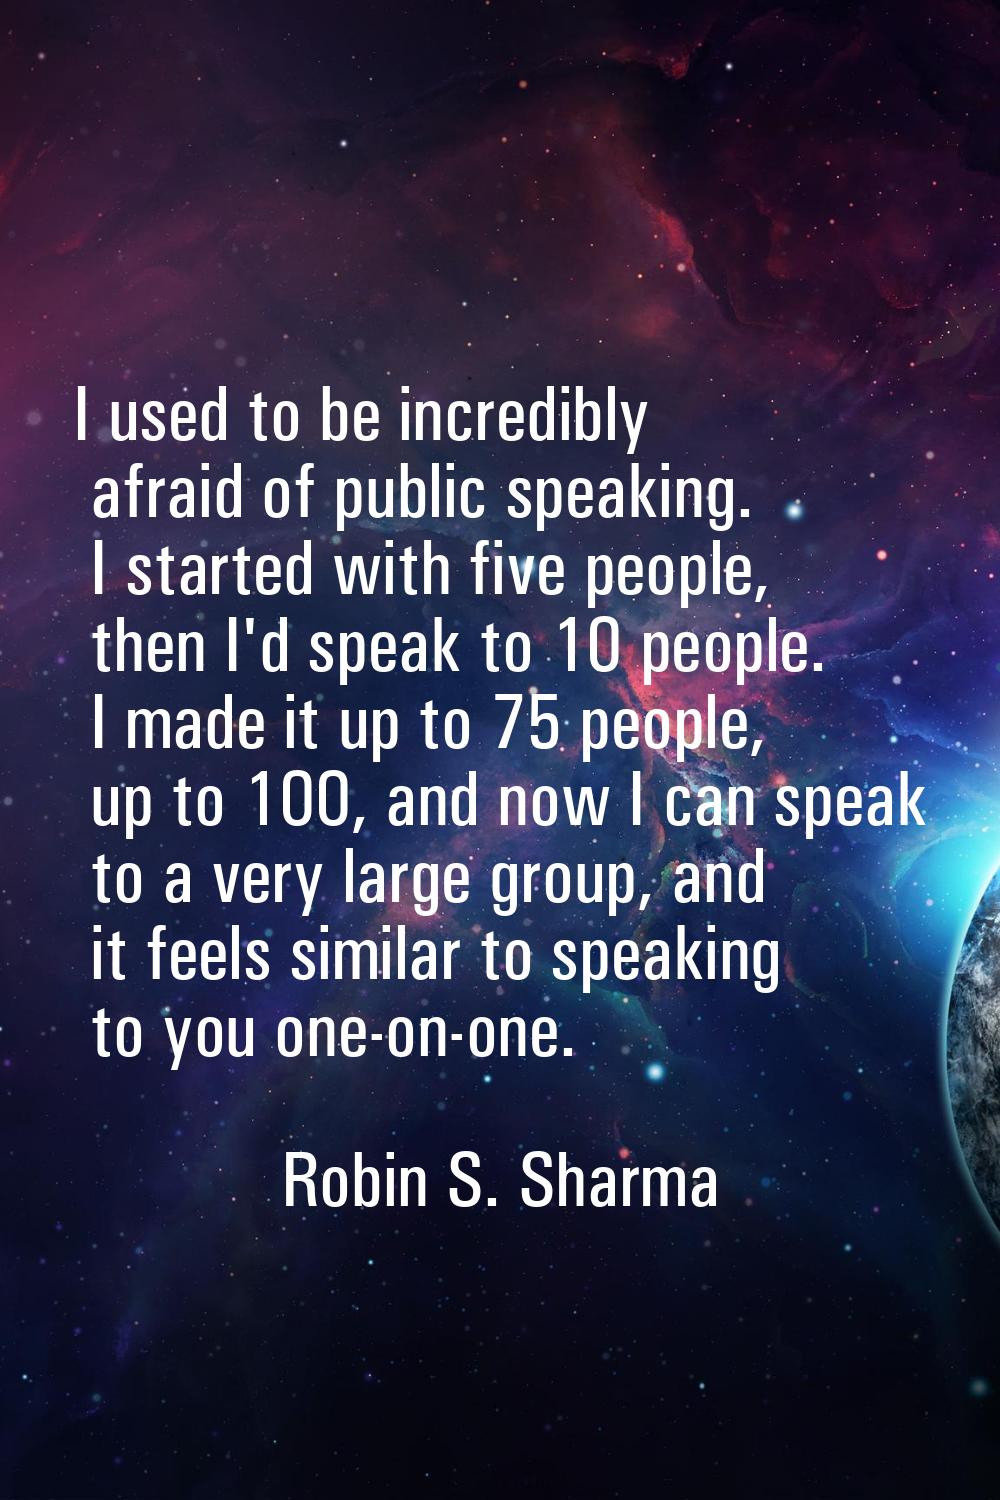 I used to be incredibly afraid of public speaking. I started with five people, then I'd speak to 10